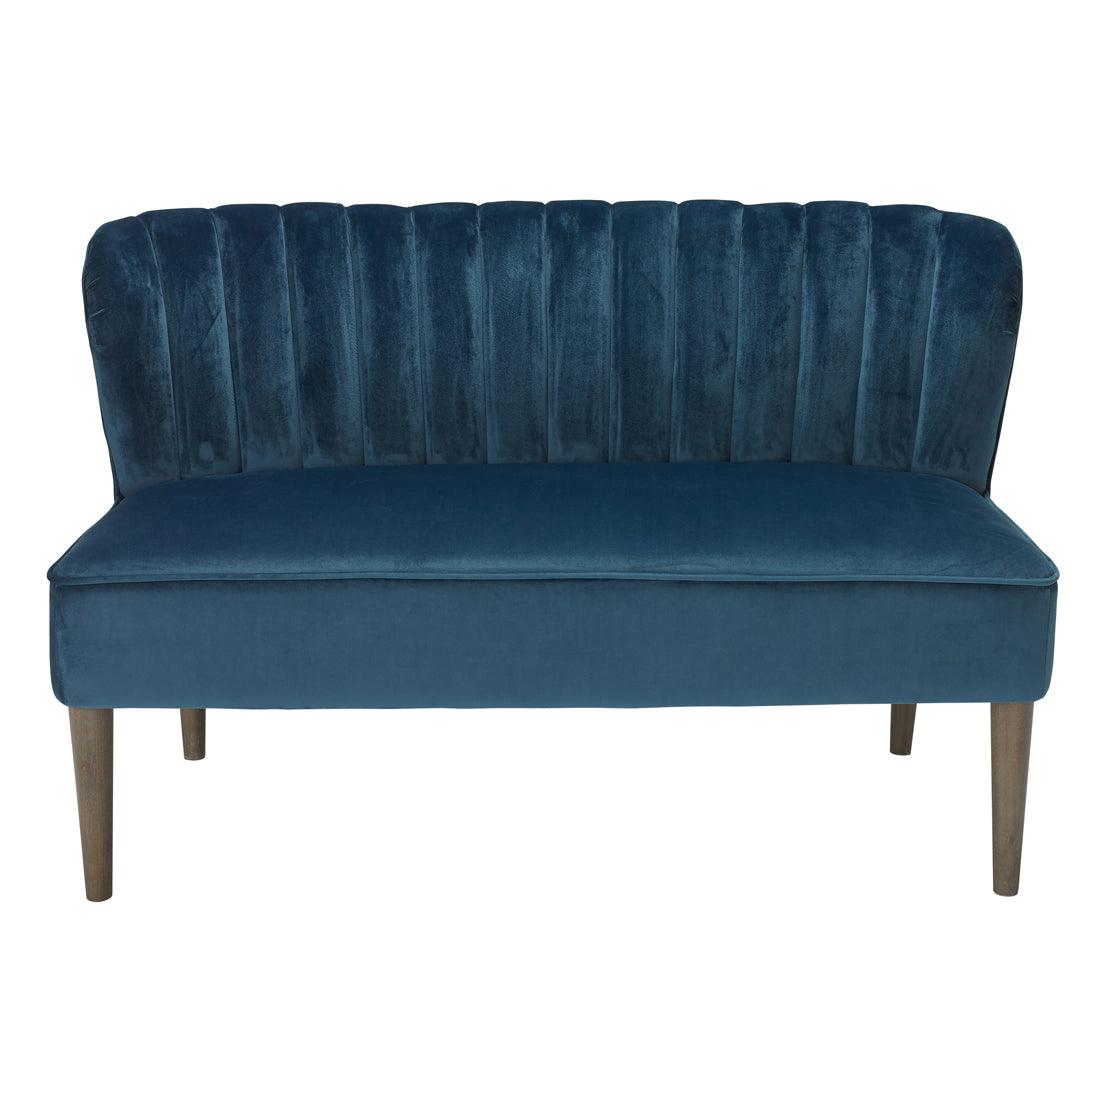 Bella 2 Seater Sofa Midnight Blue - loveyourbed.co.uk